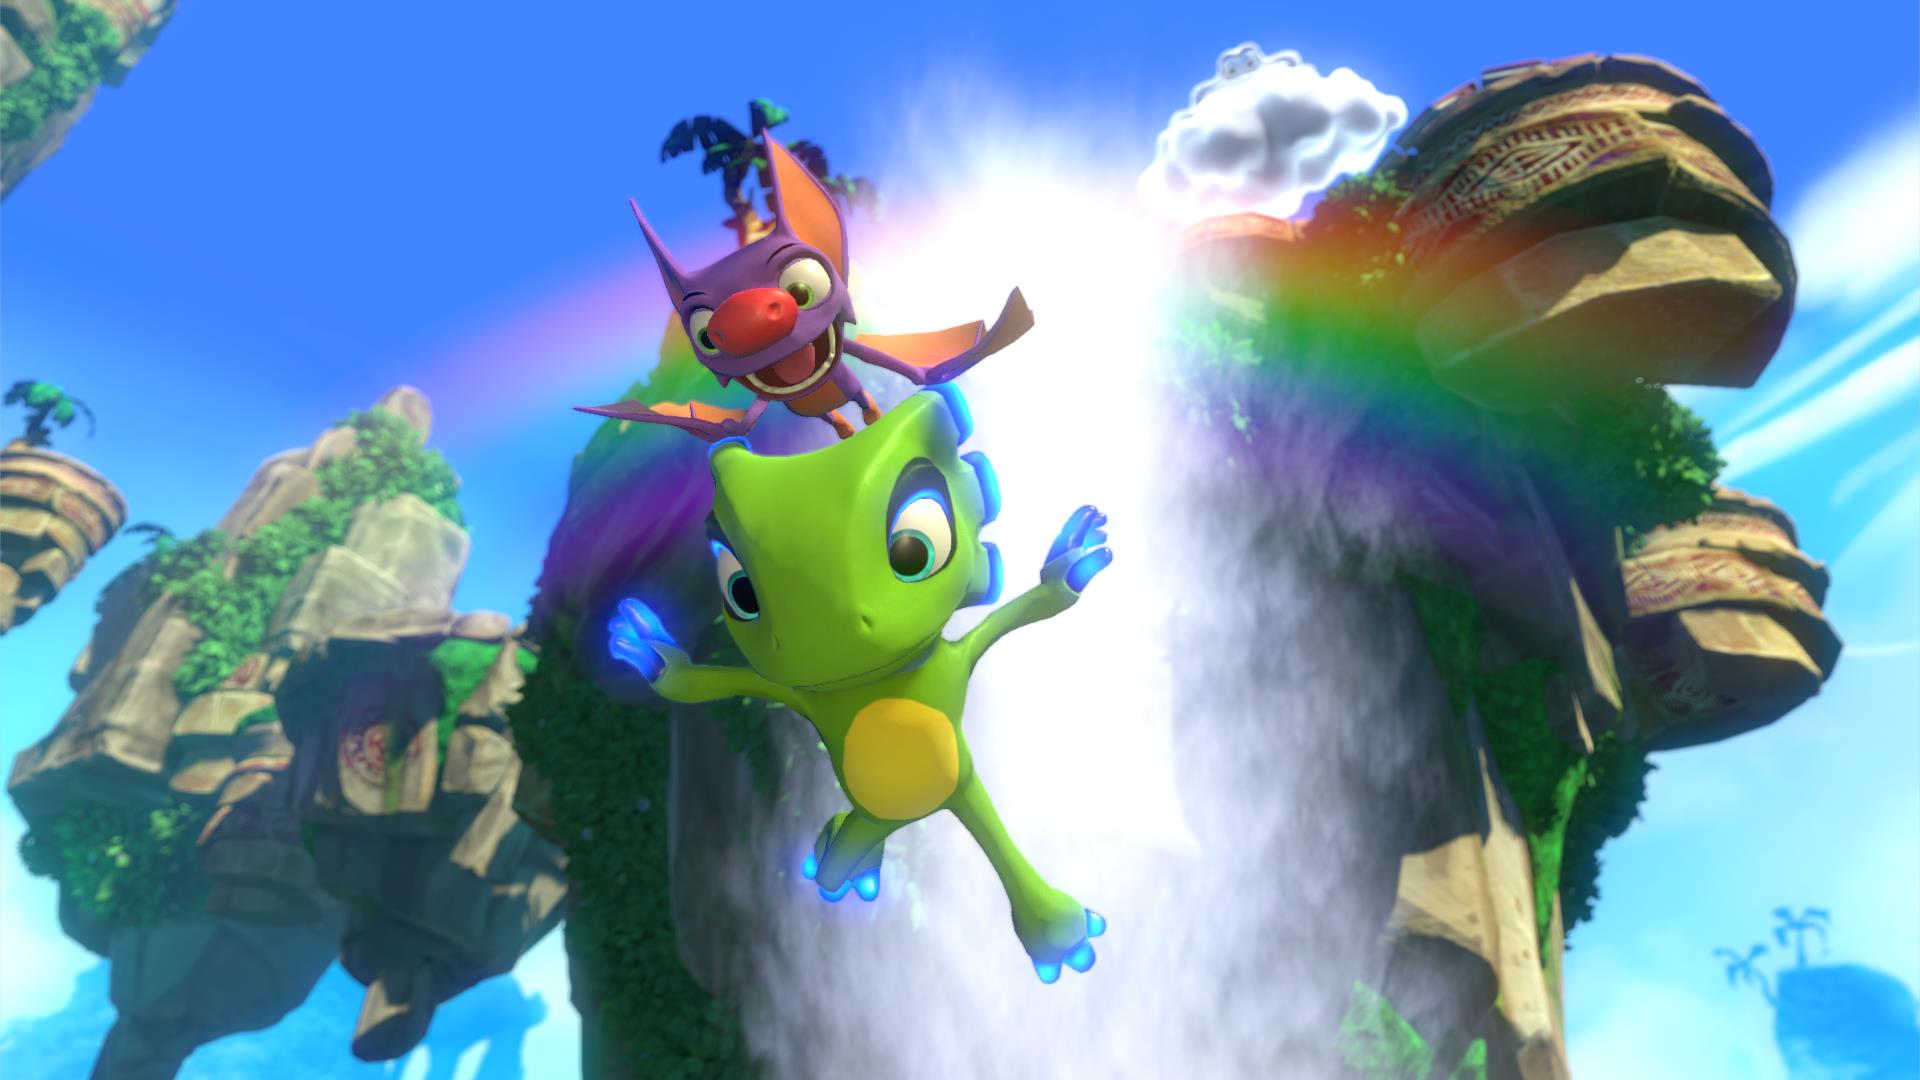 Image for Yooka-Laylee gets co-op, multiplayer modes, and a new gameplay trailer